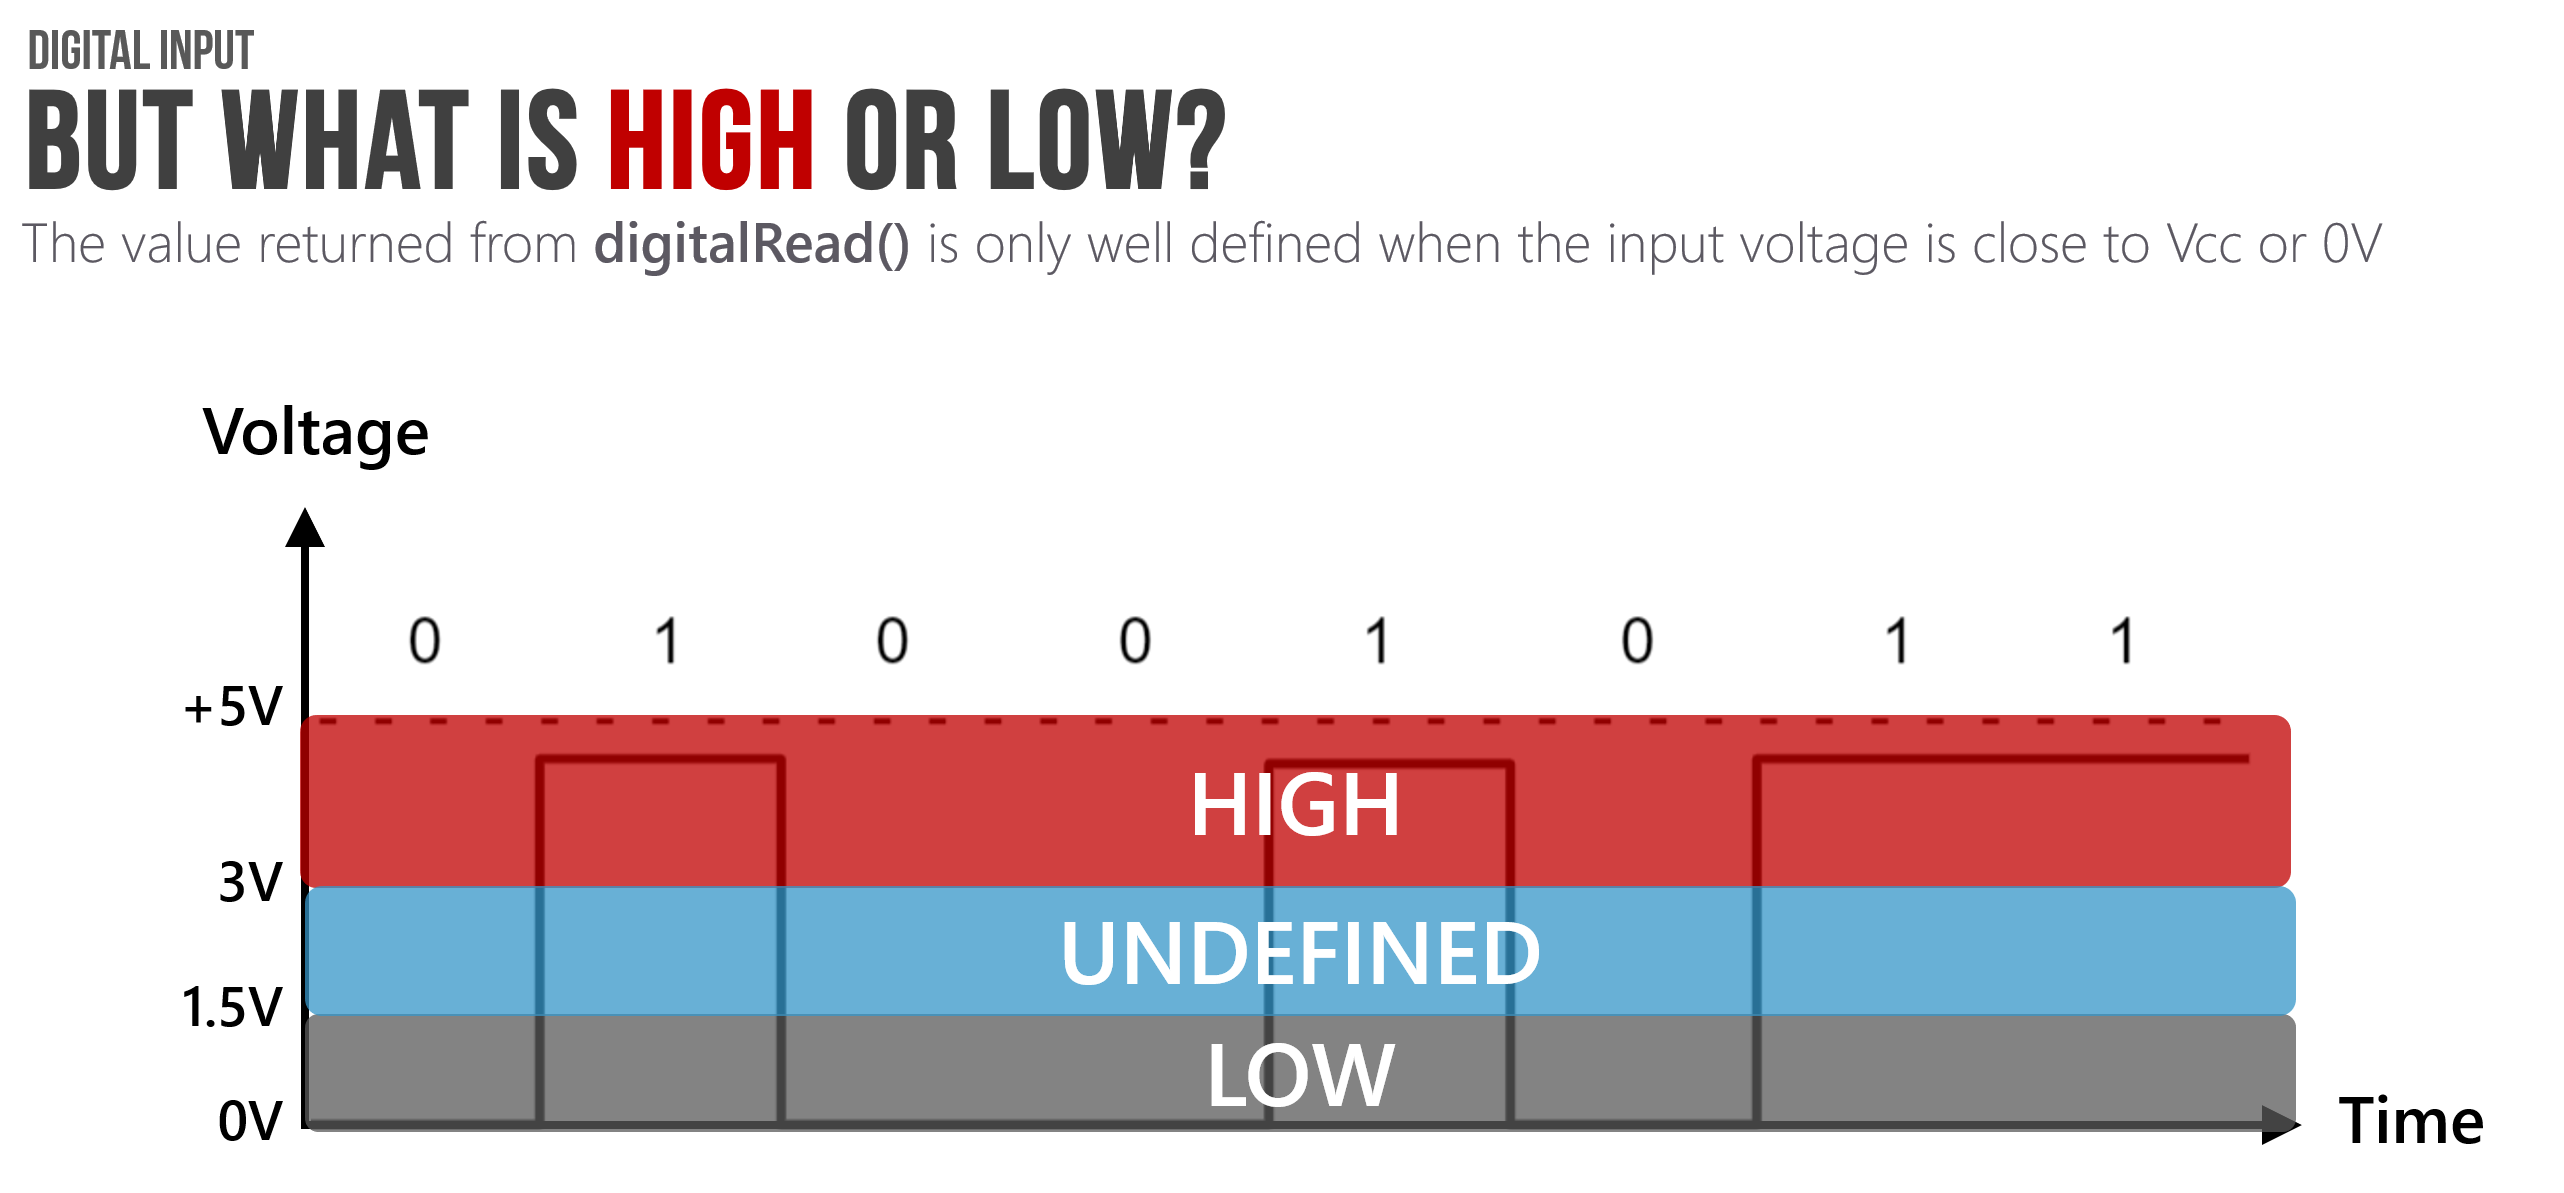 A graph showing what is considered HIGH or LOW by the ATmega328